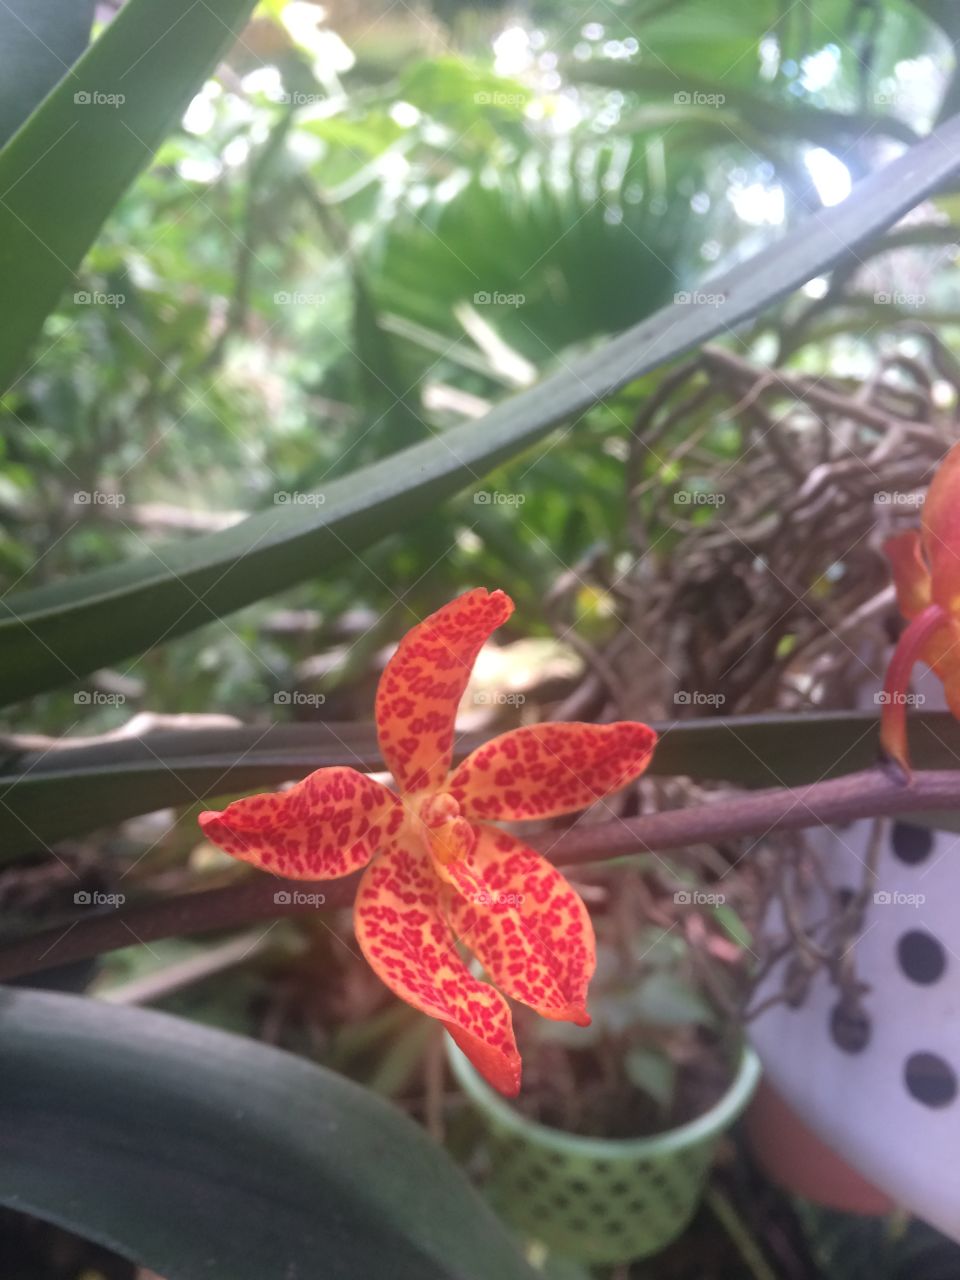 Orchid in my house.
São Paulo - Brazil 🇧🇷 